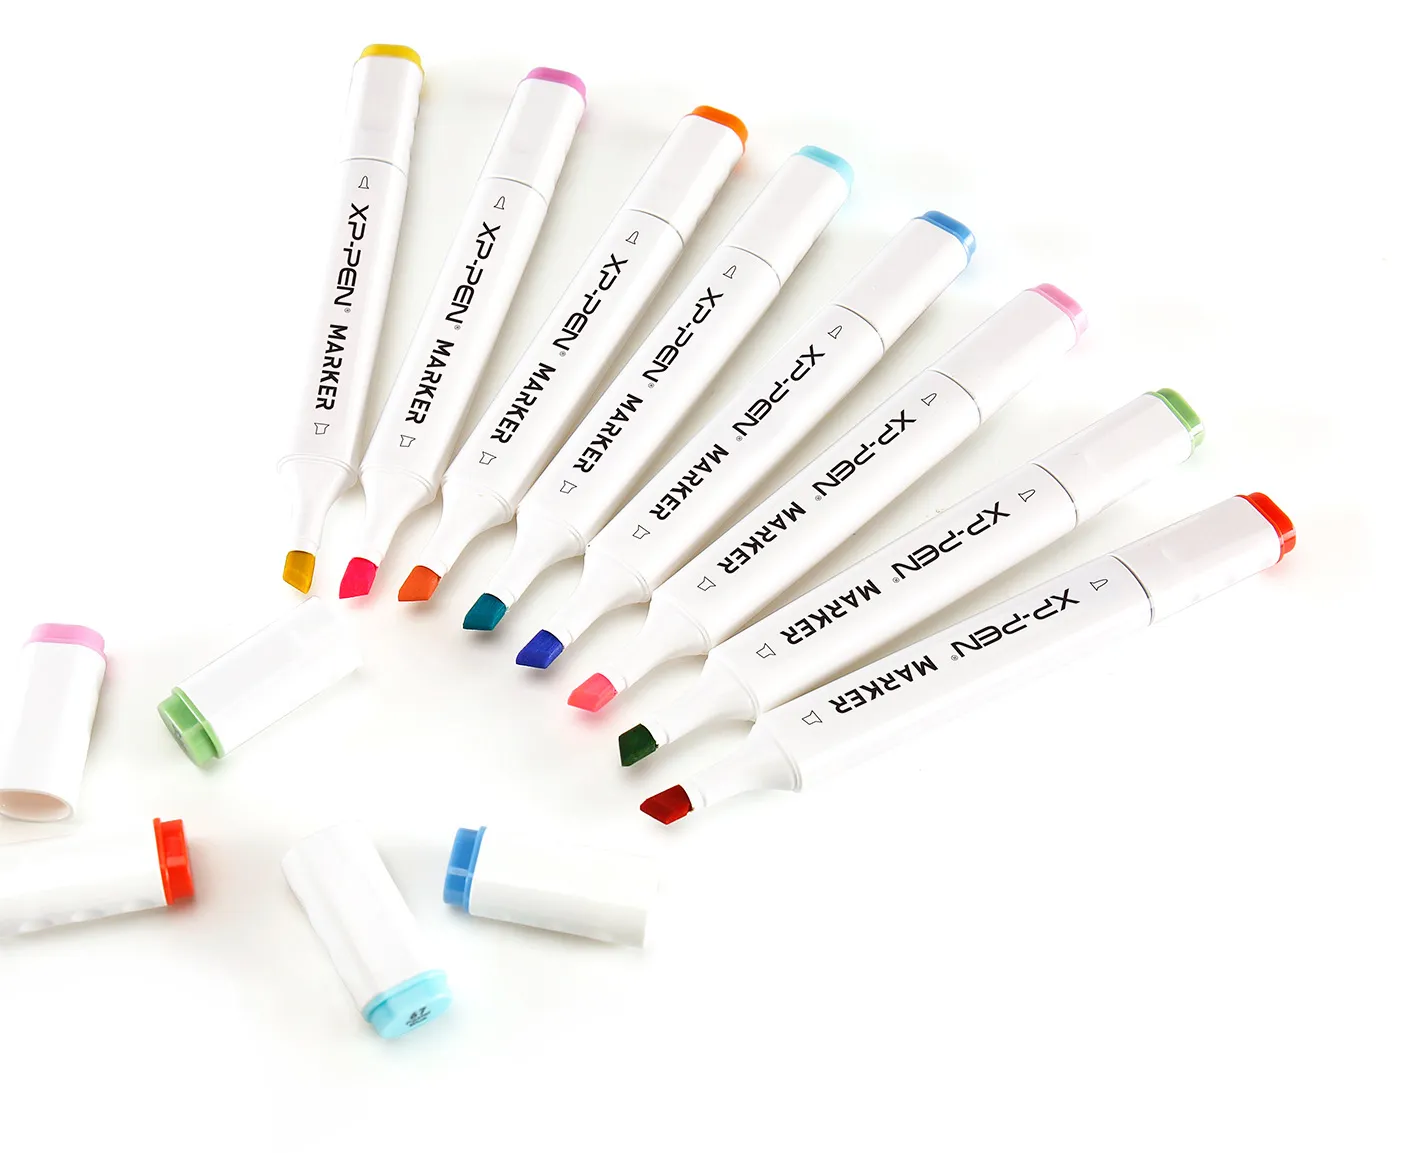 XPPen Alcohol Markers (review): Good quality, good price 